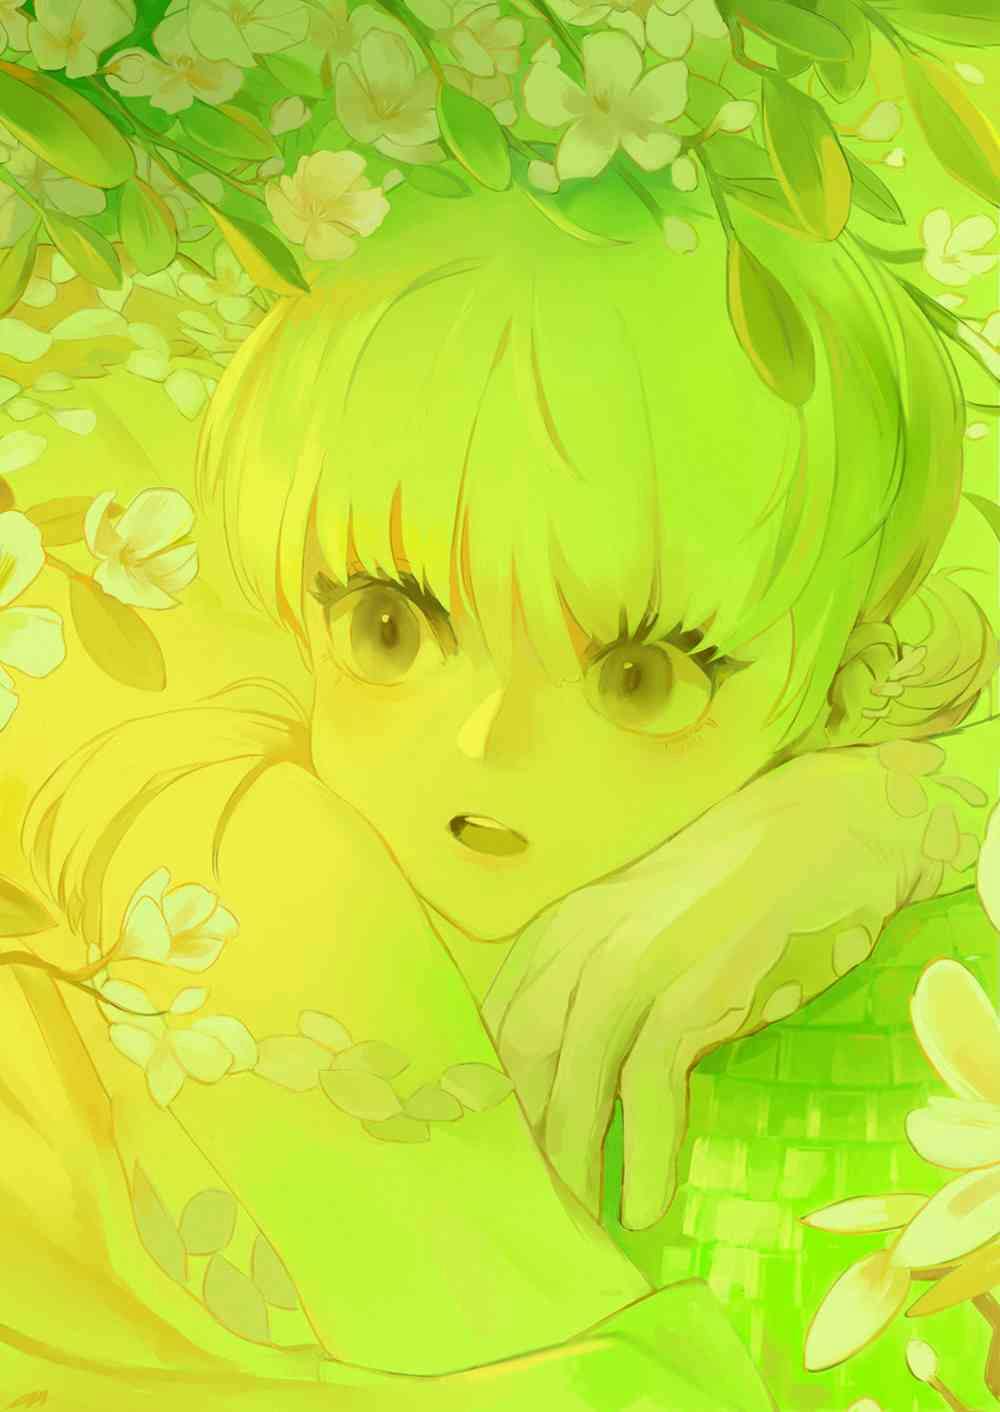 An anime style illustration of a person with large eyes and a long fringe. They are resting against their hand and are surrounded by flowers. The image is tones of green.